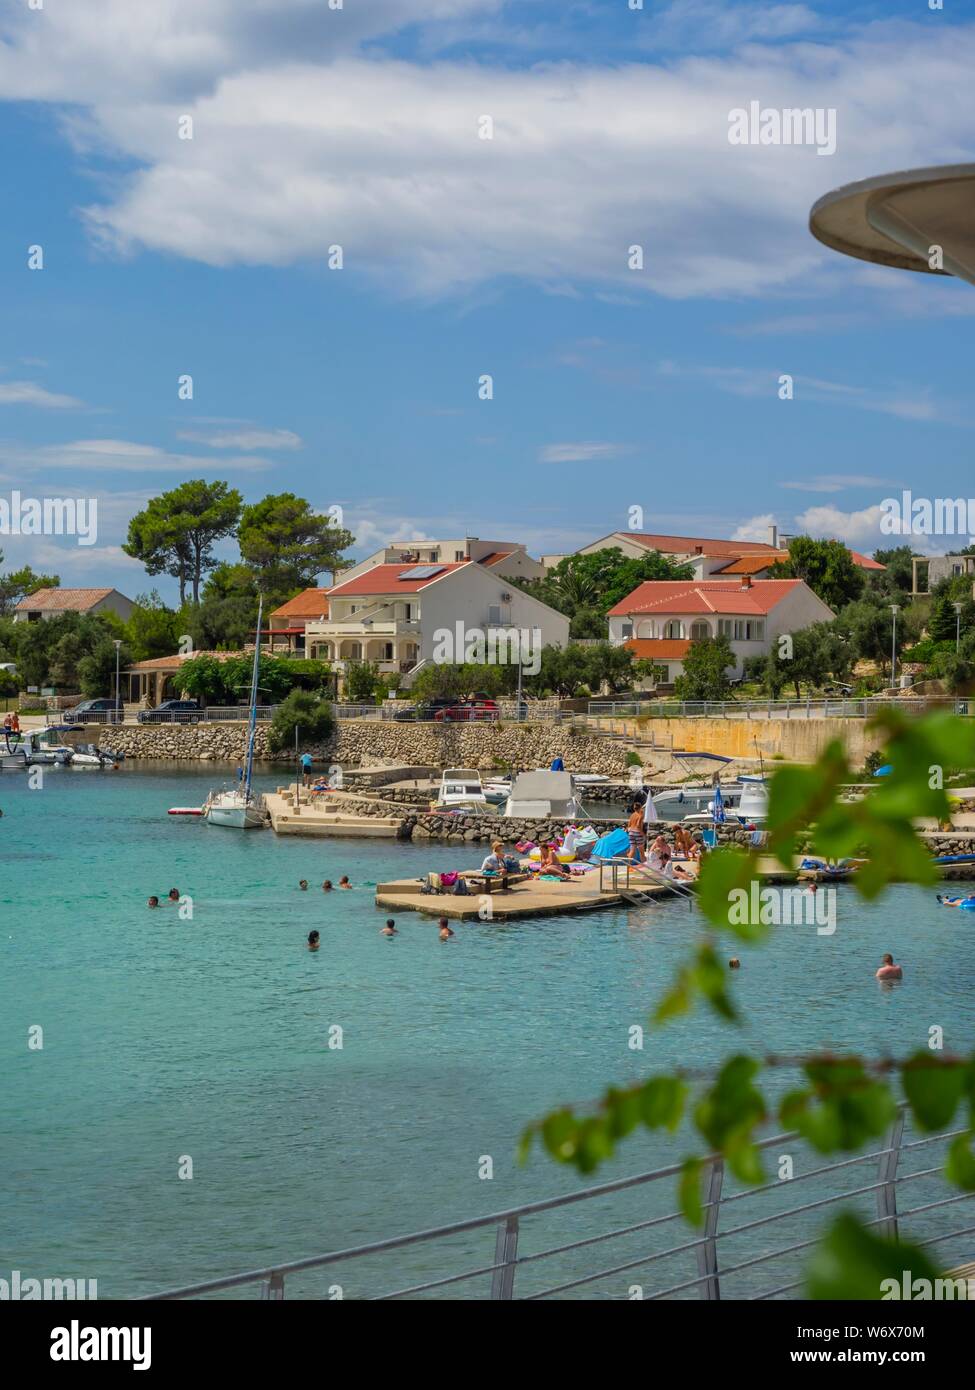 Center of Jakasnica on island Pag in Croatia public sandy beach Stock Photo